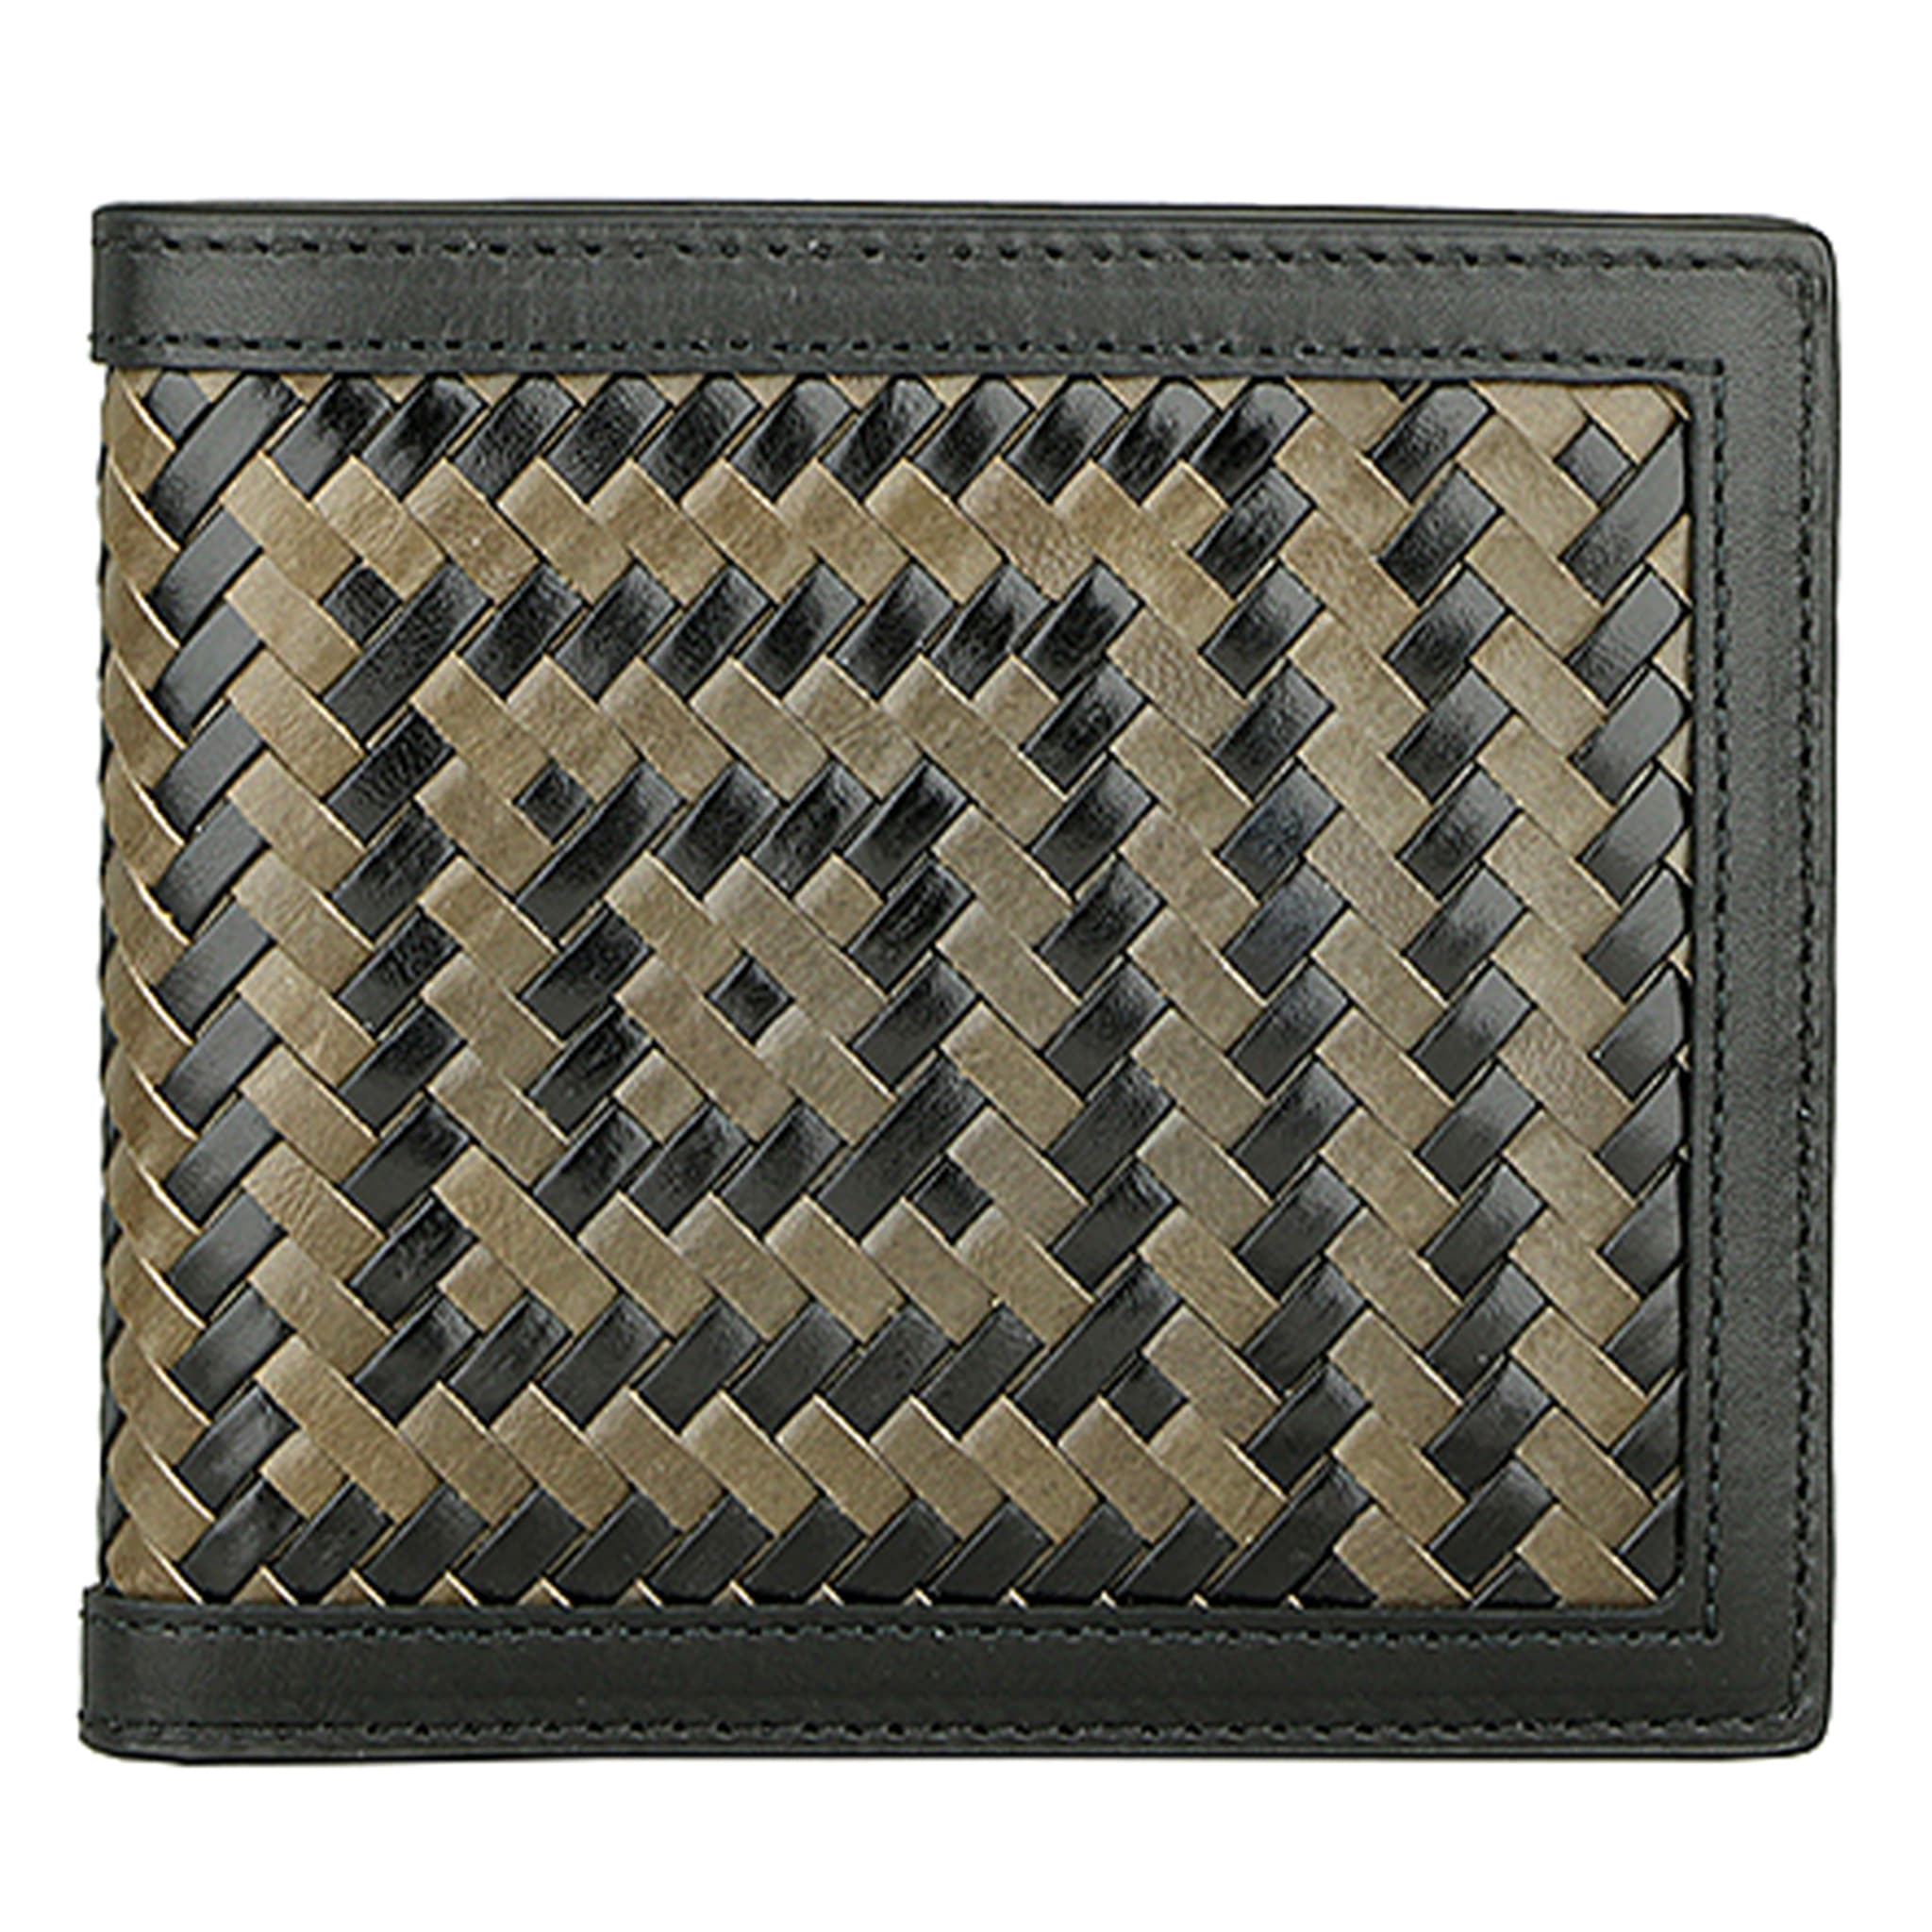 Braided Leather Black Wallet - Main view